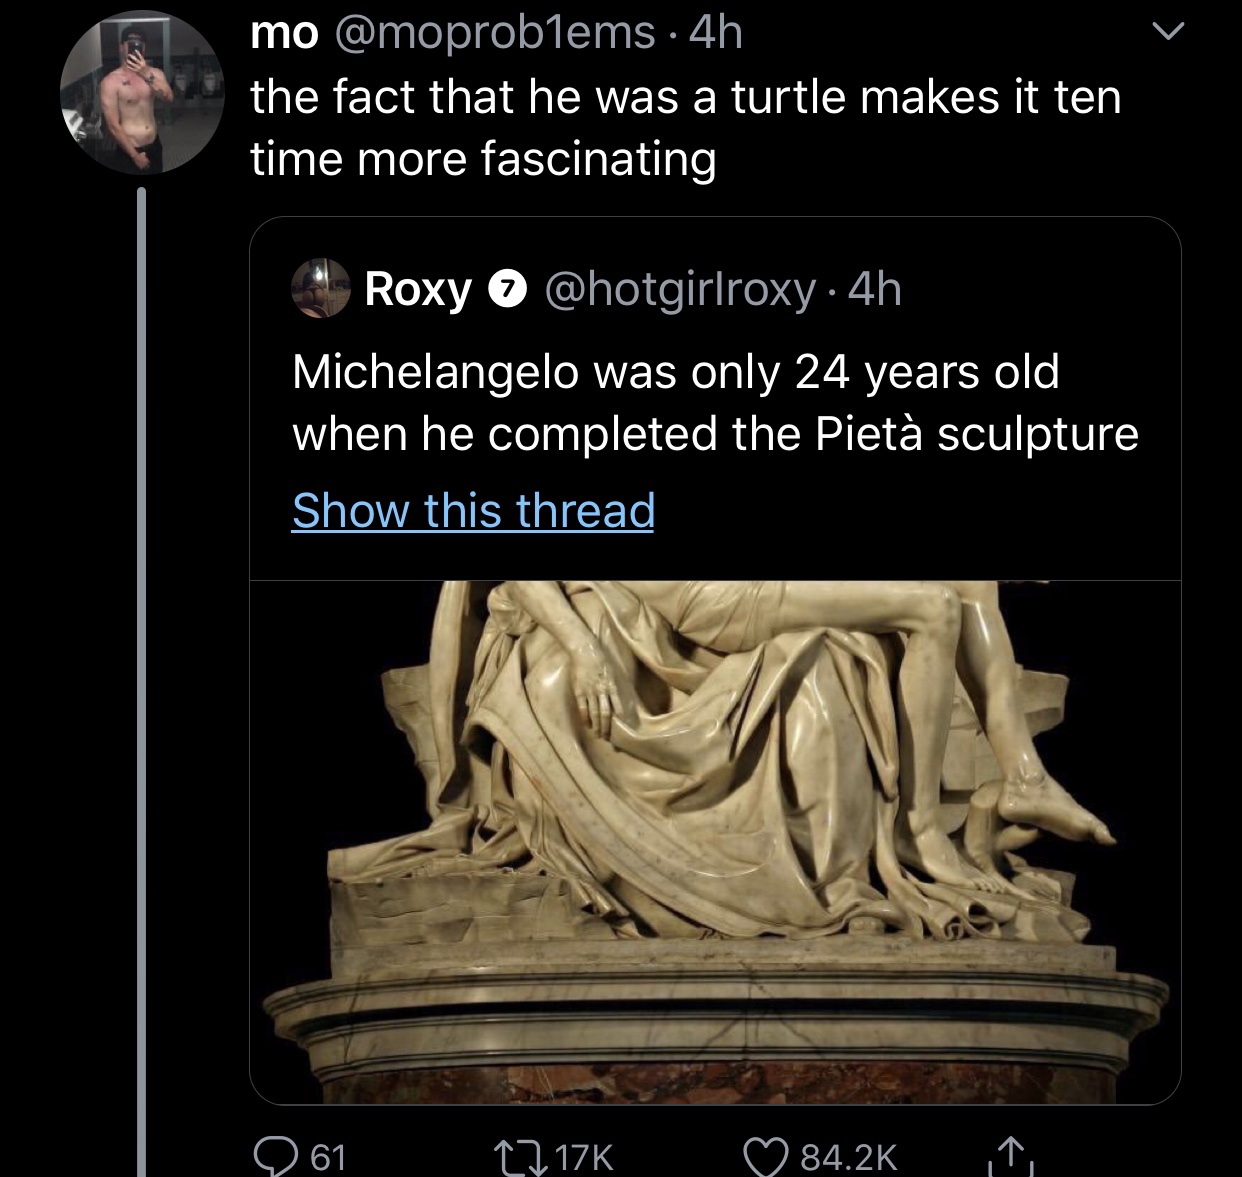 saint peter's basilica, pietà - mo 4h the fact that he was a turtle makes it ten time more fascinating Roxy 2 4h Michelangelo was only 24 years old when he completed the Piet sculpture Show this thread _